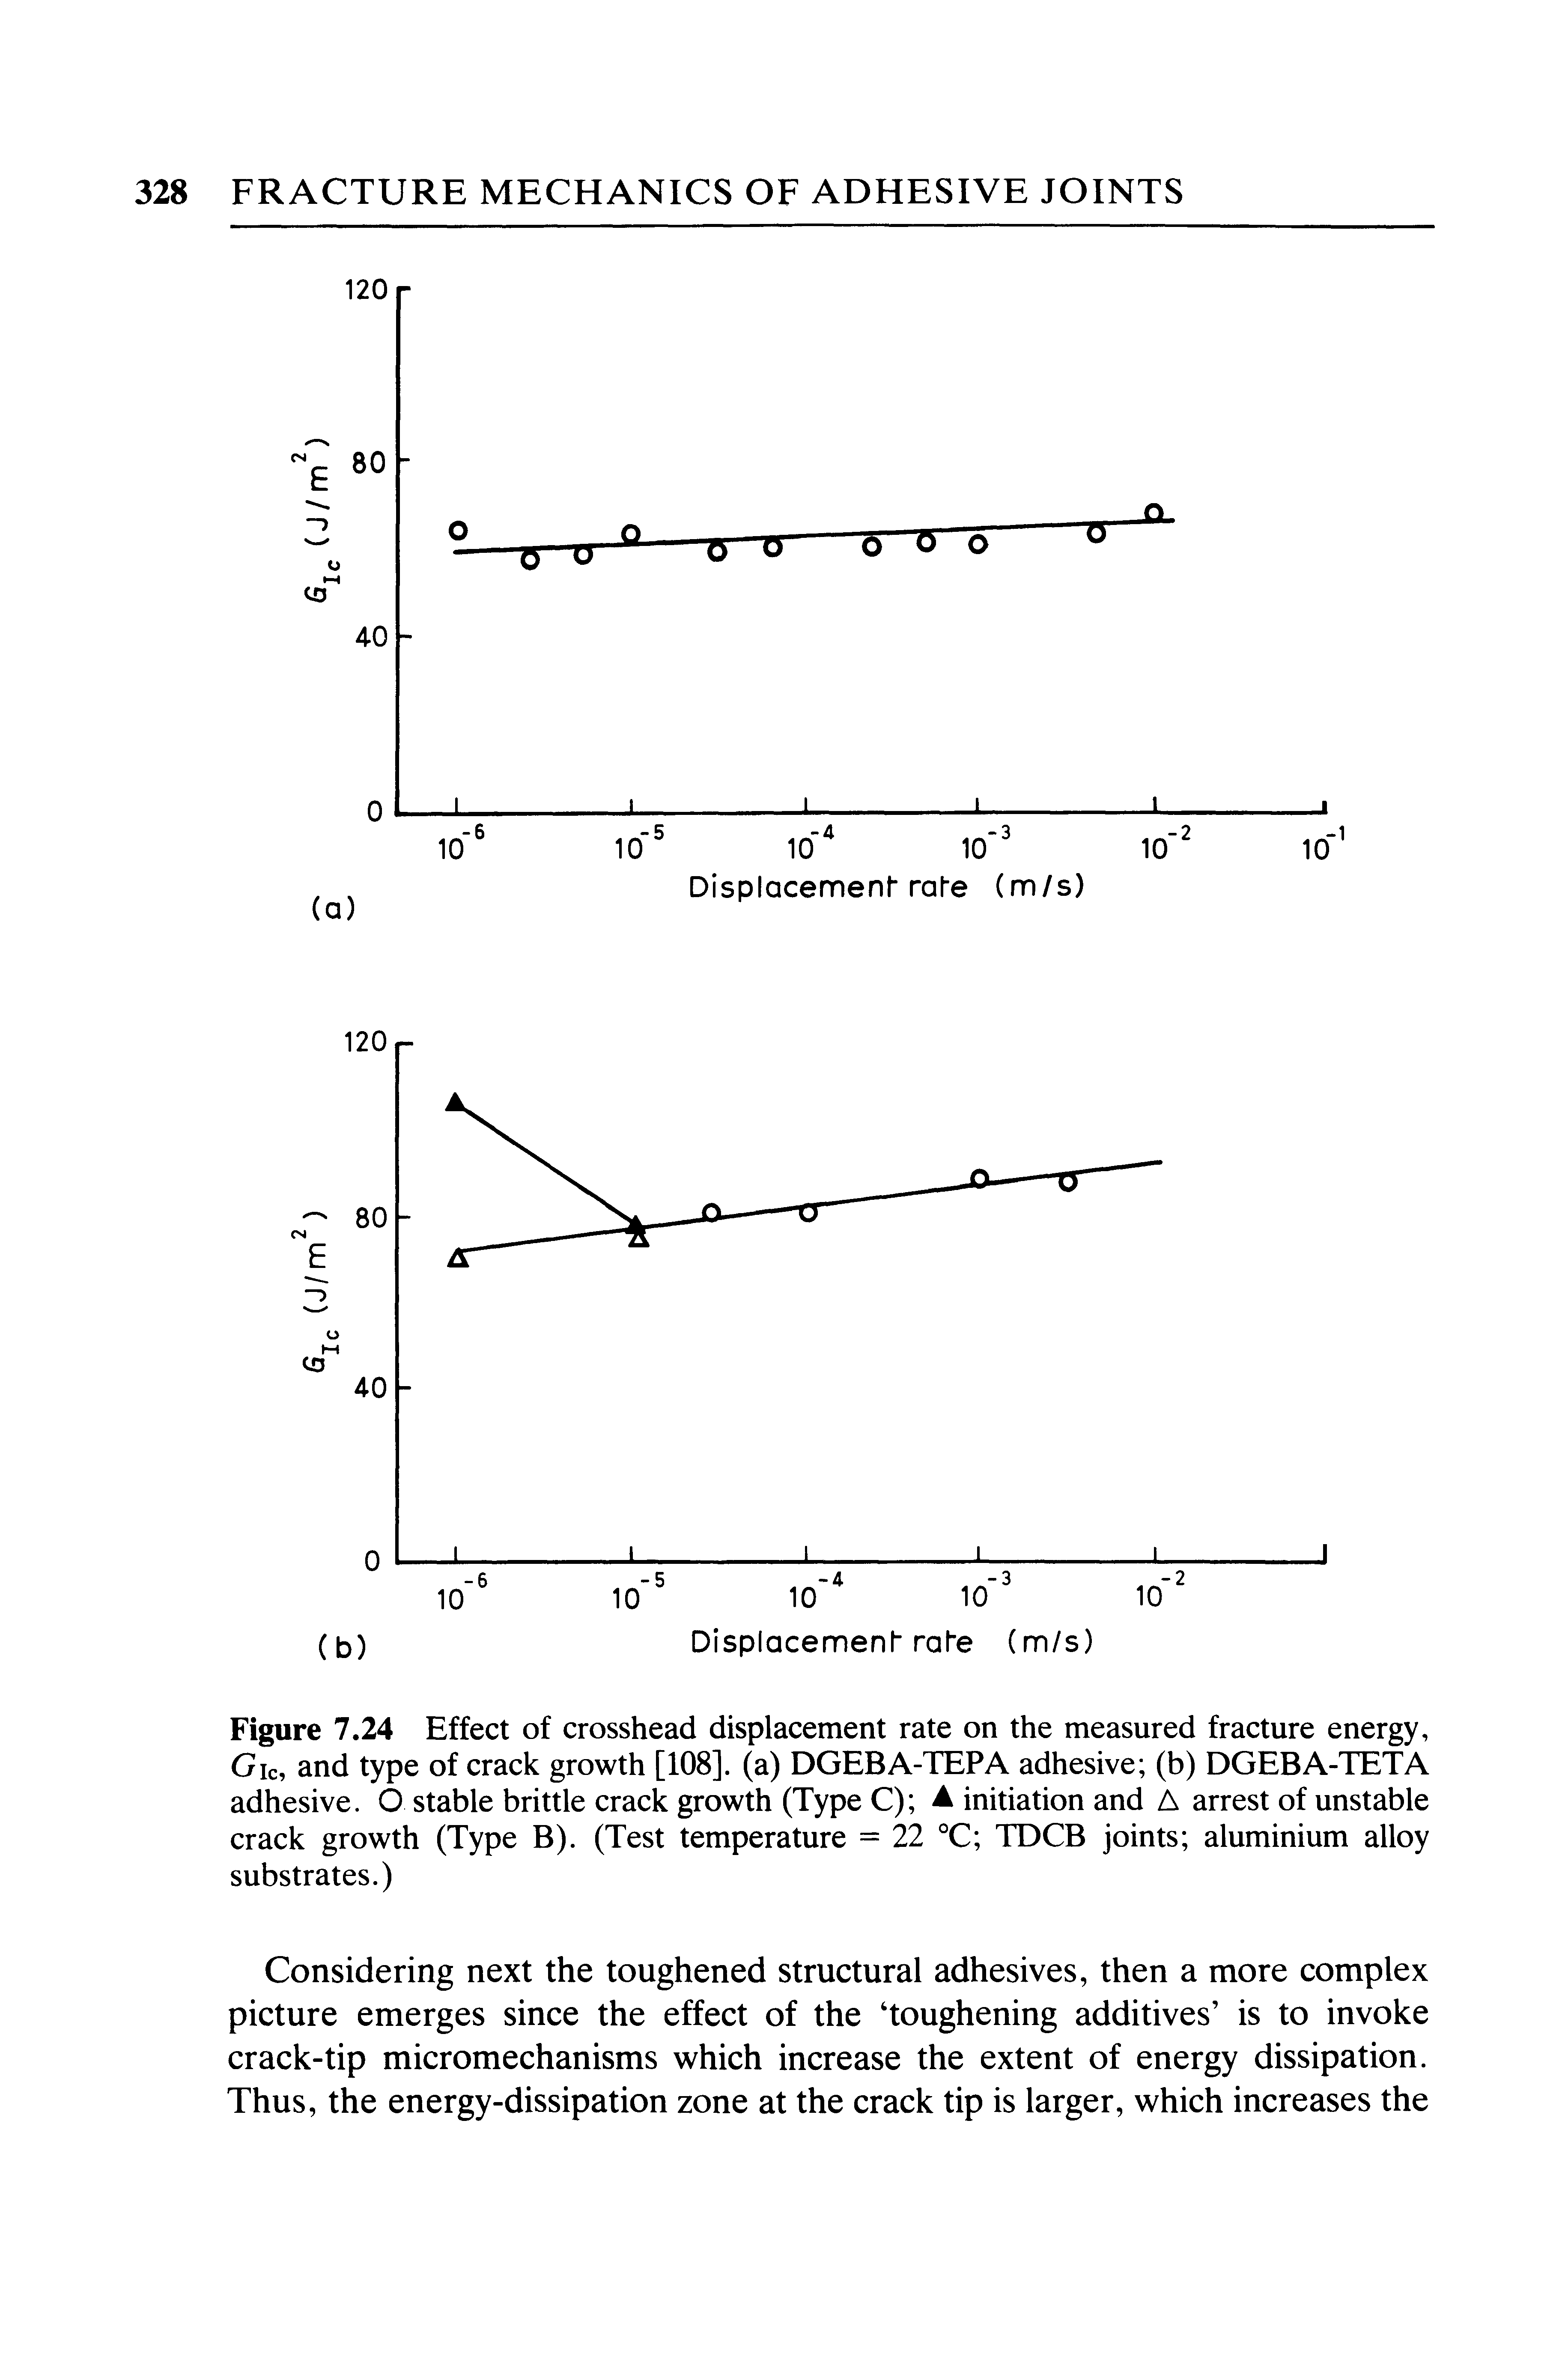 Figure 7.24 Effect of crosshead displacement rate on the measured fracture energy, Gic, and type of crack growth [108]. (a) DGEBA-TEPA adhesive (b) DGEBA-TETA adhesive. O stable brittle crack growth (Type C) A initiation and A arrest of unstable crack growth (Type B). (Test temperature = 22 °C TDCB joints aluminium alloy substrates.)...